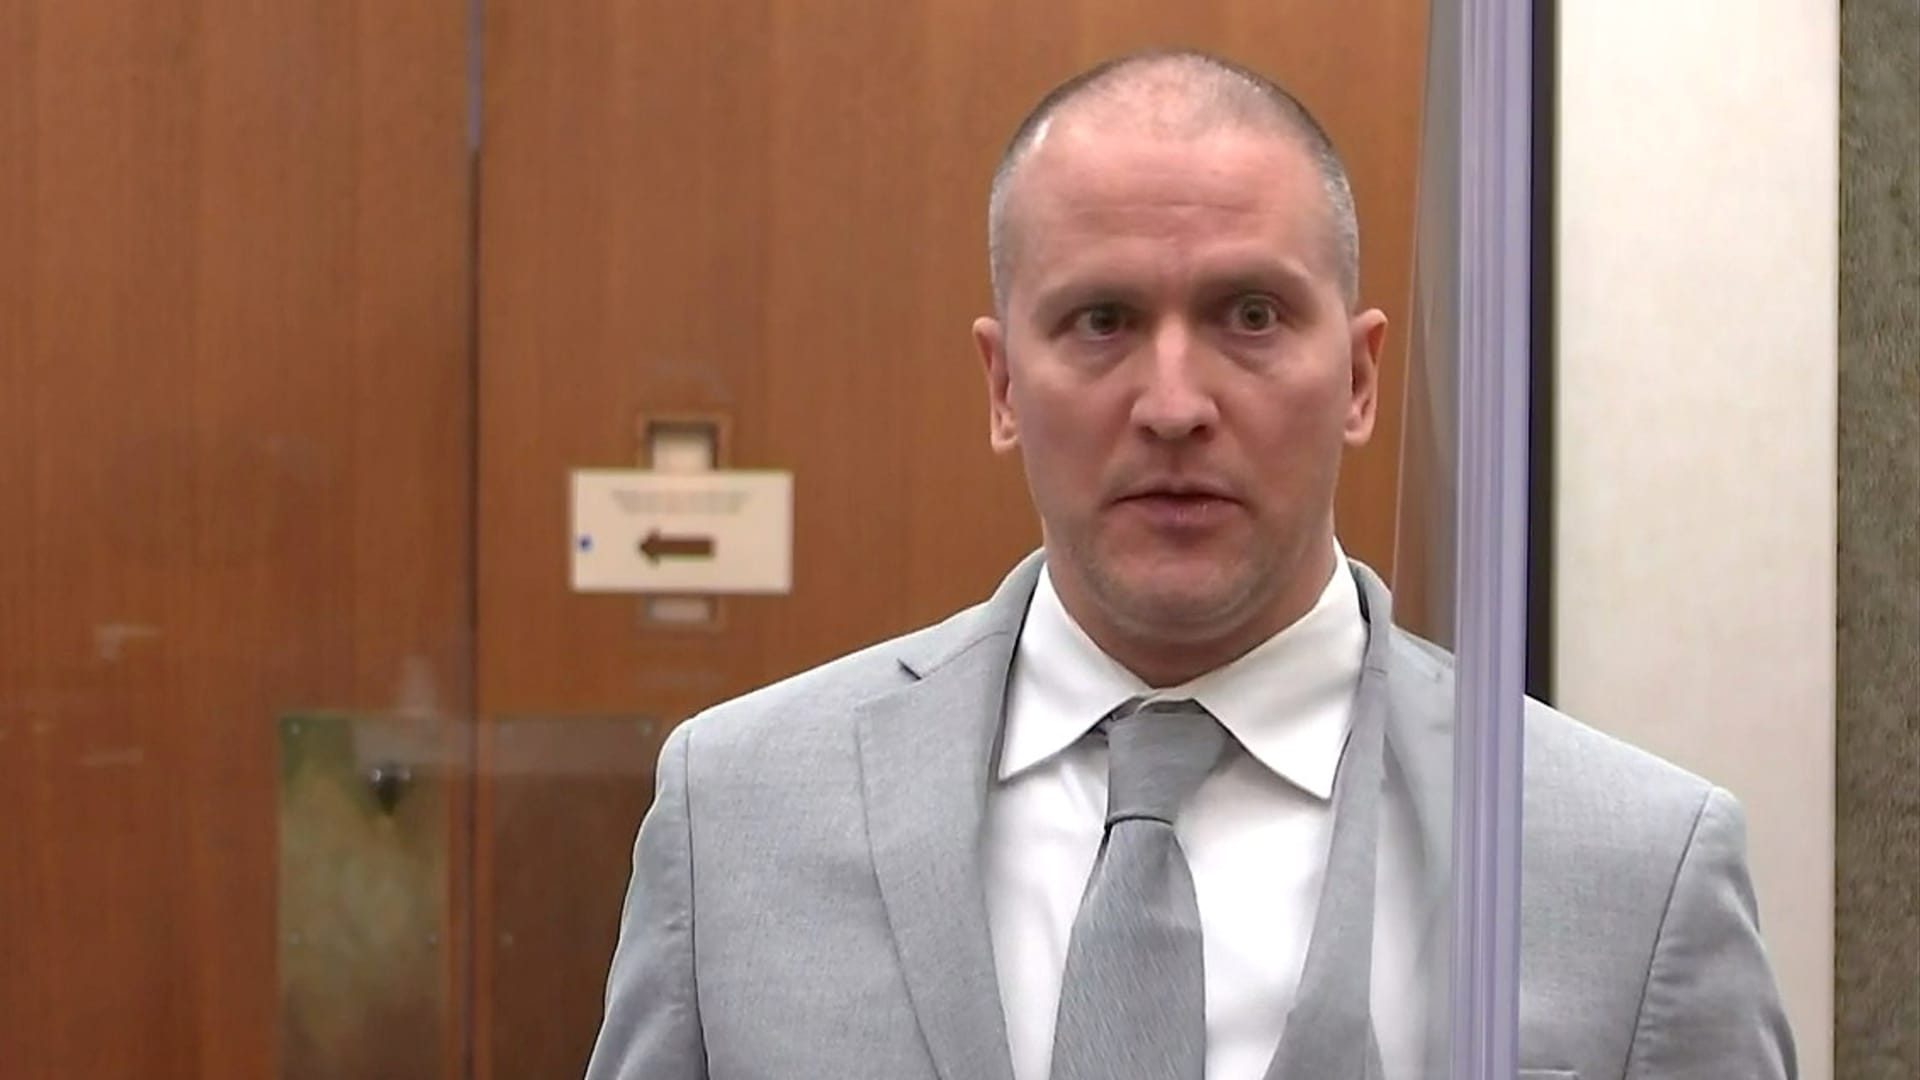 Former Minneapolis police officer Derek Chauvin addresses his sentencing hearing and the judge as he awaits his sentence after being convicted of murder in the death of Floyd in Minneapolis, Minnesota, U.S. June 25, 2021 in a still image from video.